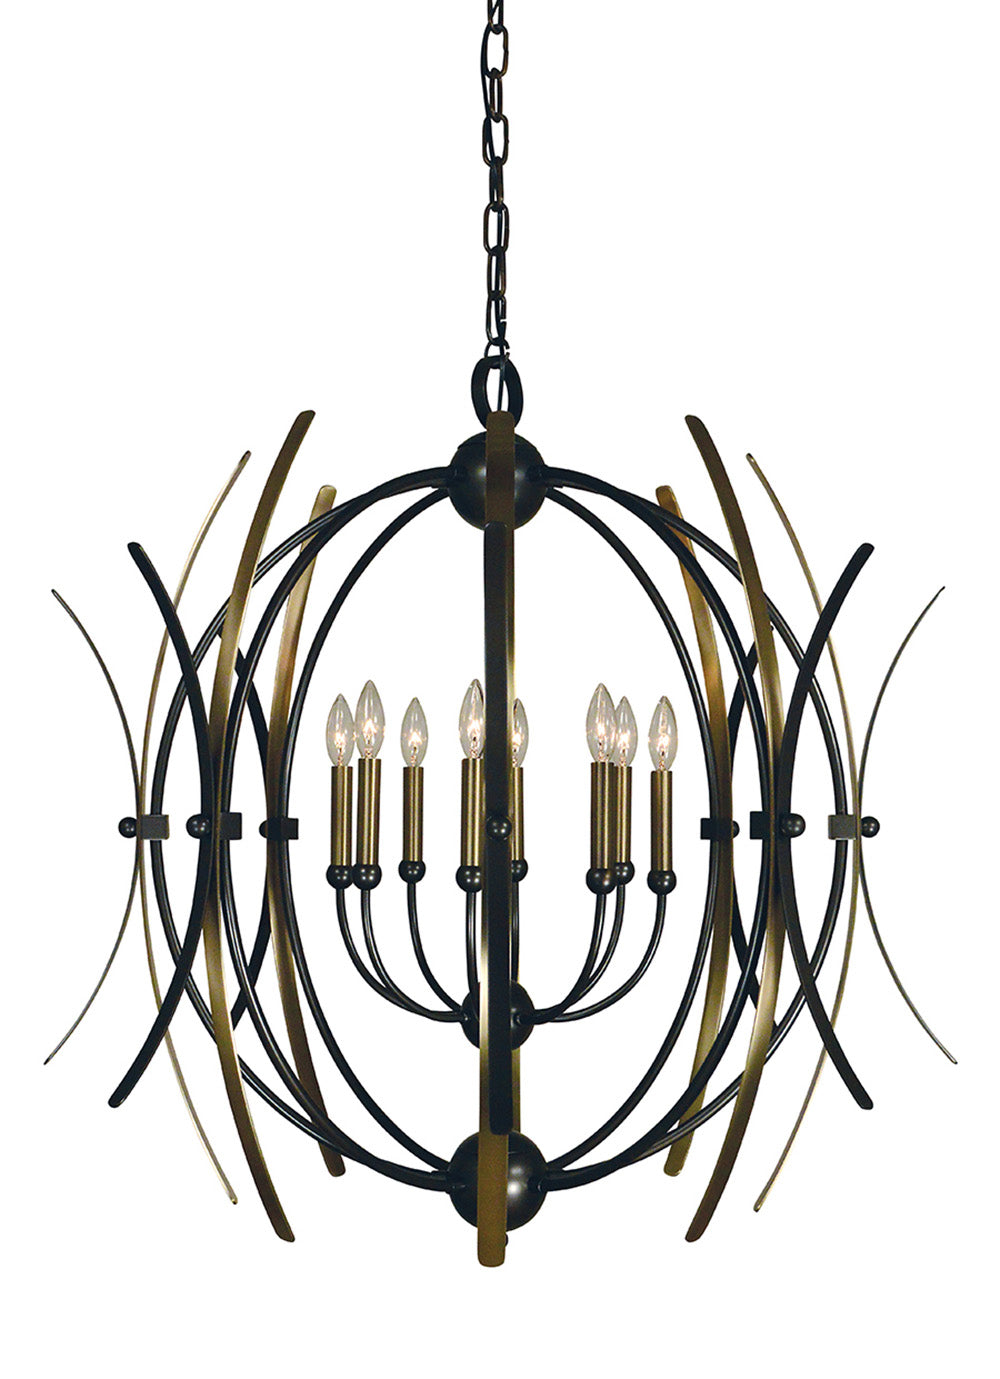 Framburg Monique 8 - Light Mahogany Bronze with Antique Brass Accents Chandelier 5058 MB/AB